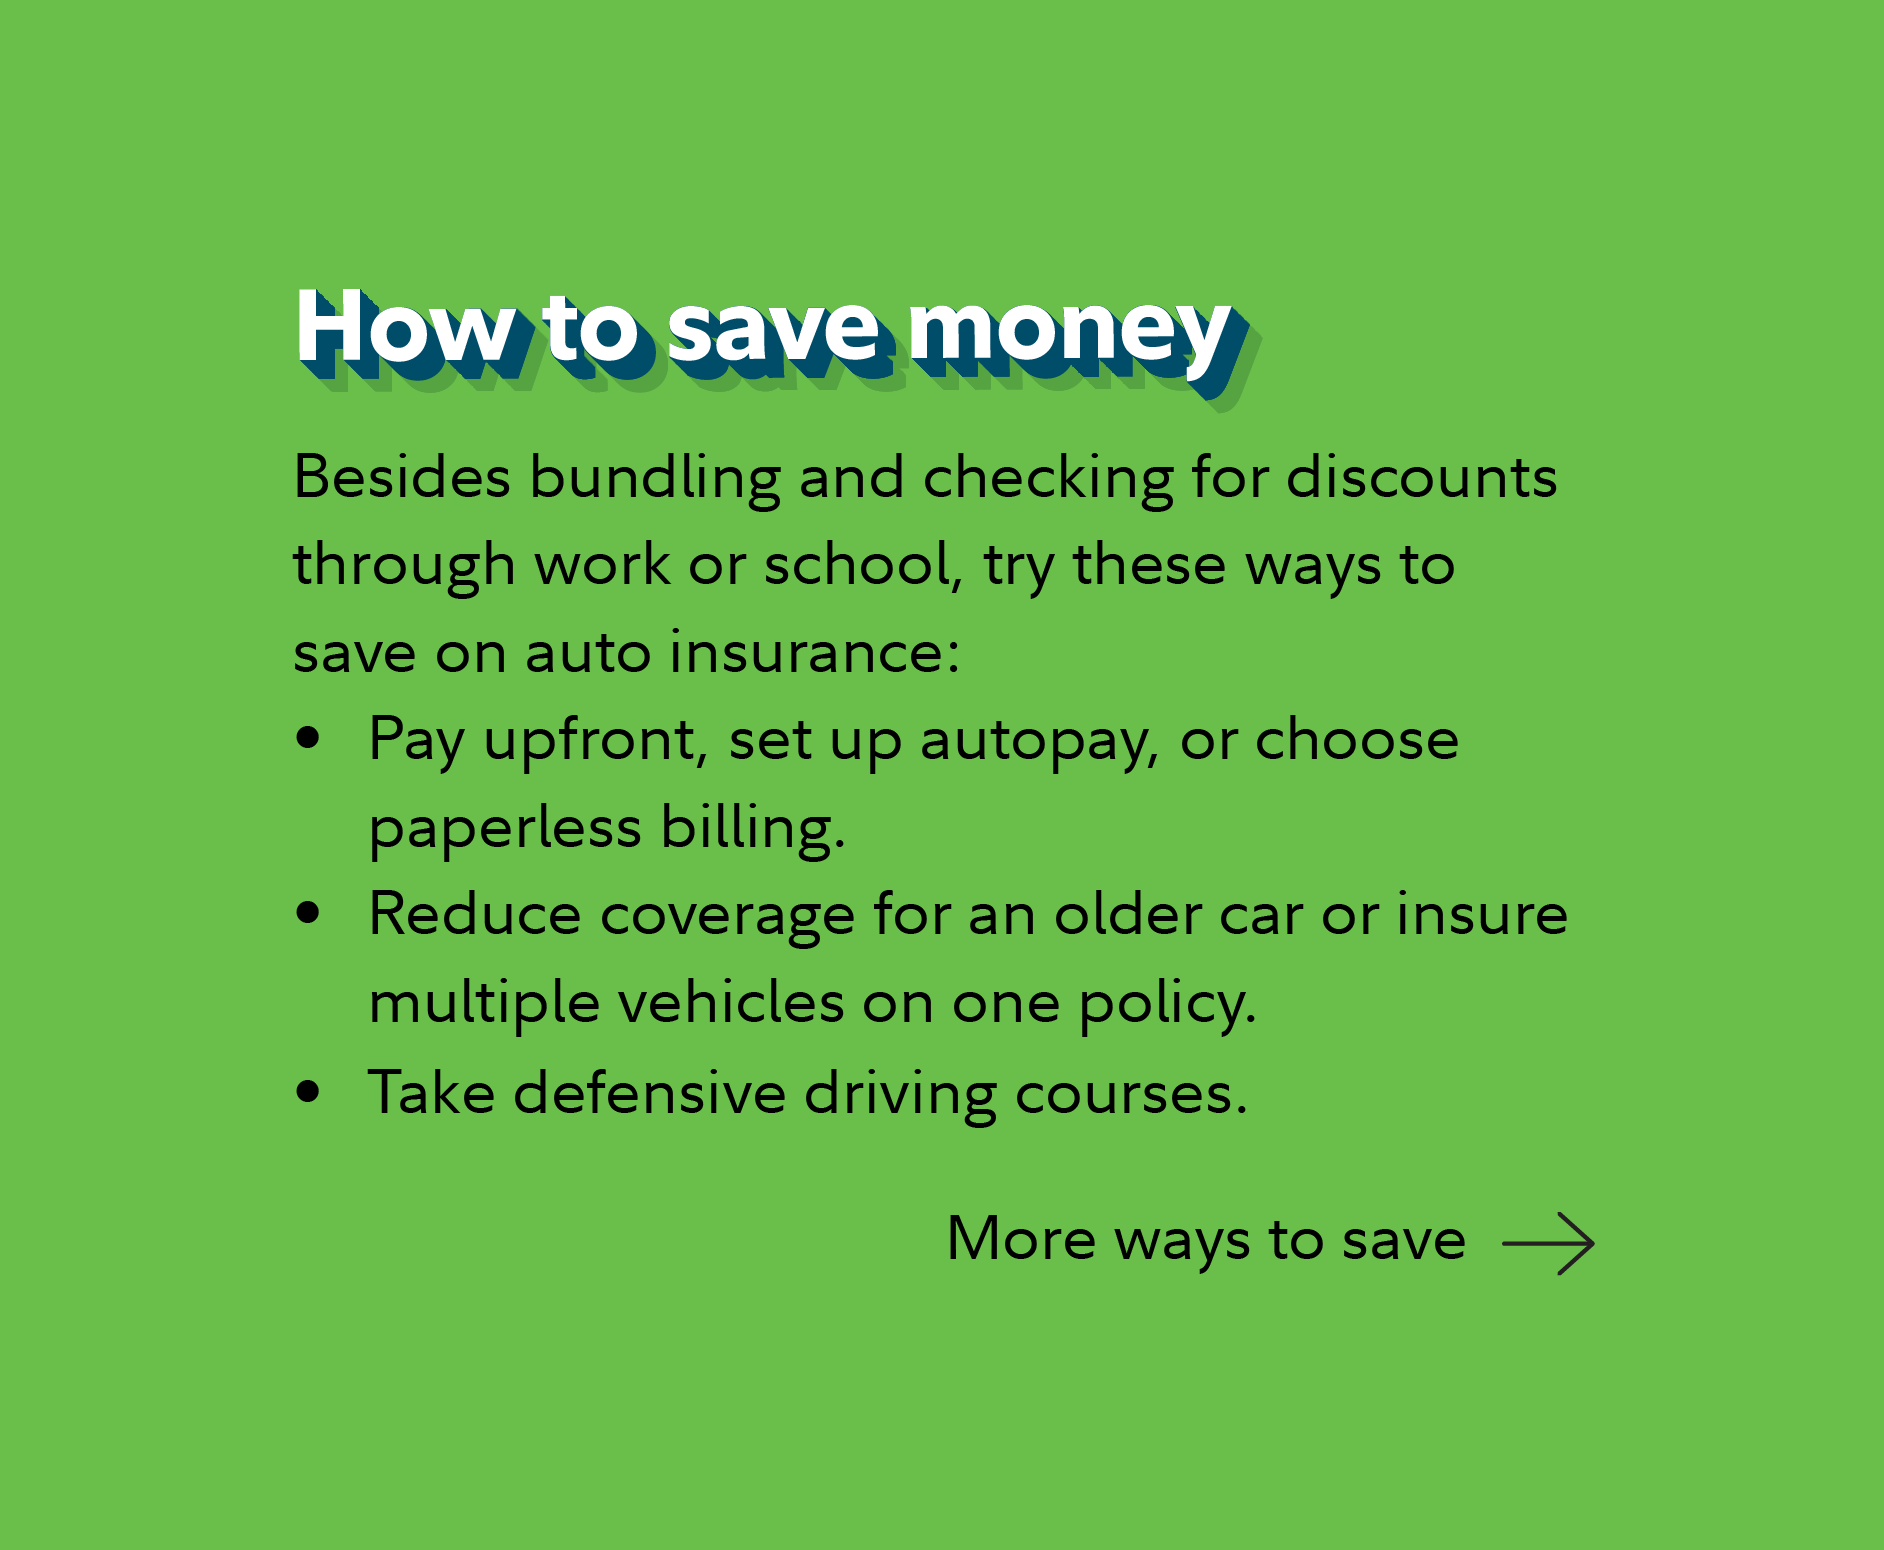 How to save money Besides bundling and checking for discounts through work or school, try these ways to save on auto insurance: Pay upfront, set up autopay, or choose paperless billing. Reduce coverage for an older car or insure multiple vehicles on one policy. Take defensive driving courses. Continue for more ways to save. 